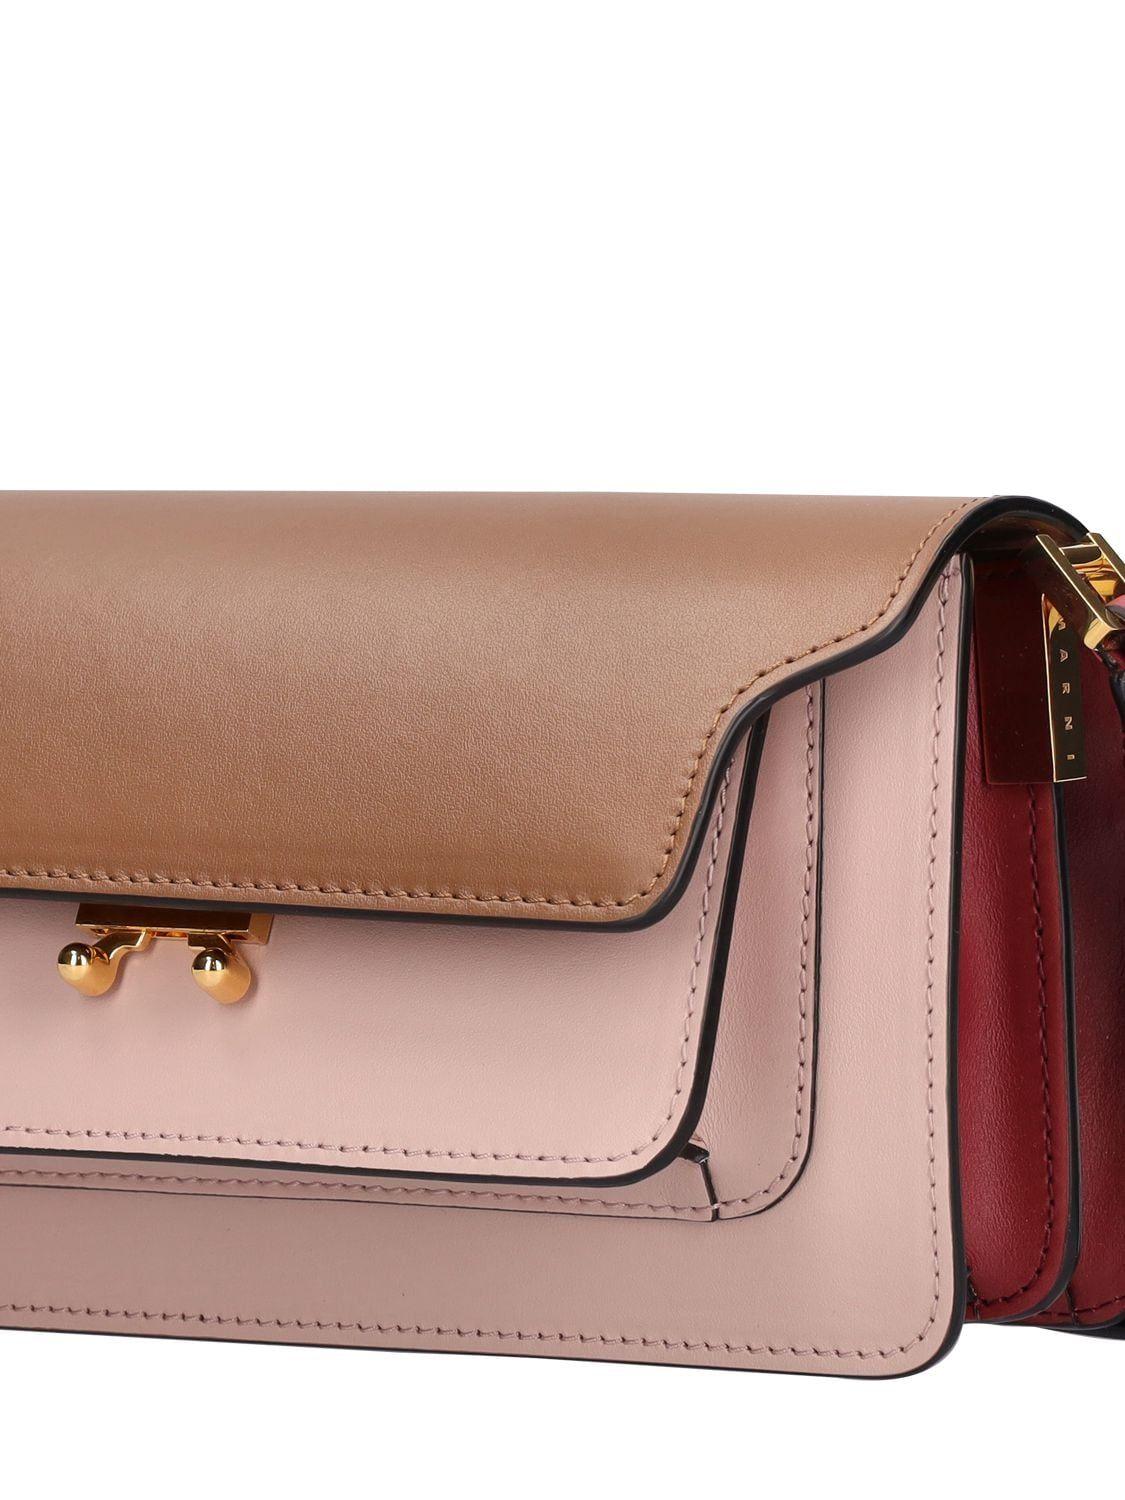 MARNI: Trunk bag in leather - Strawberry